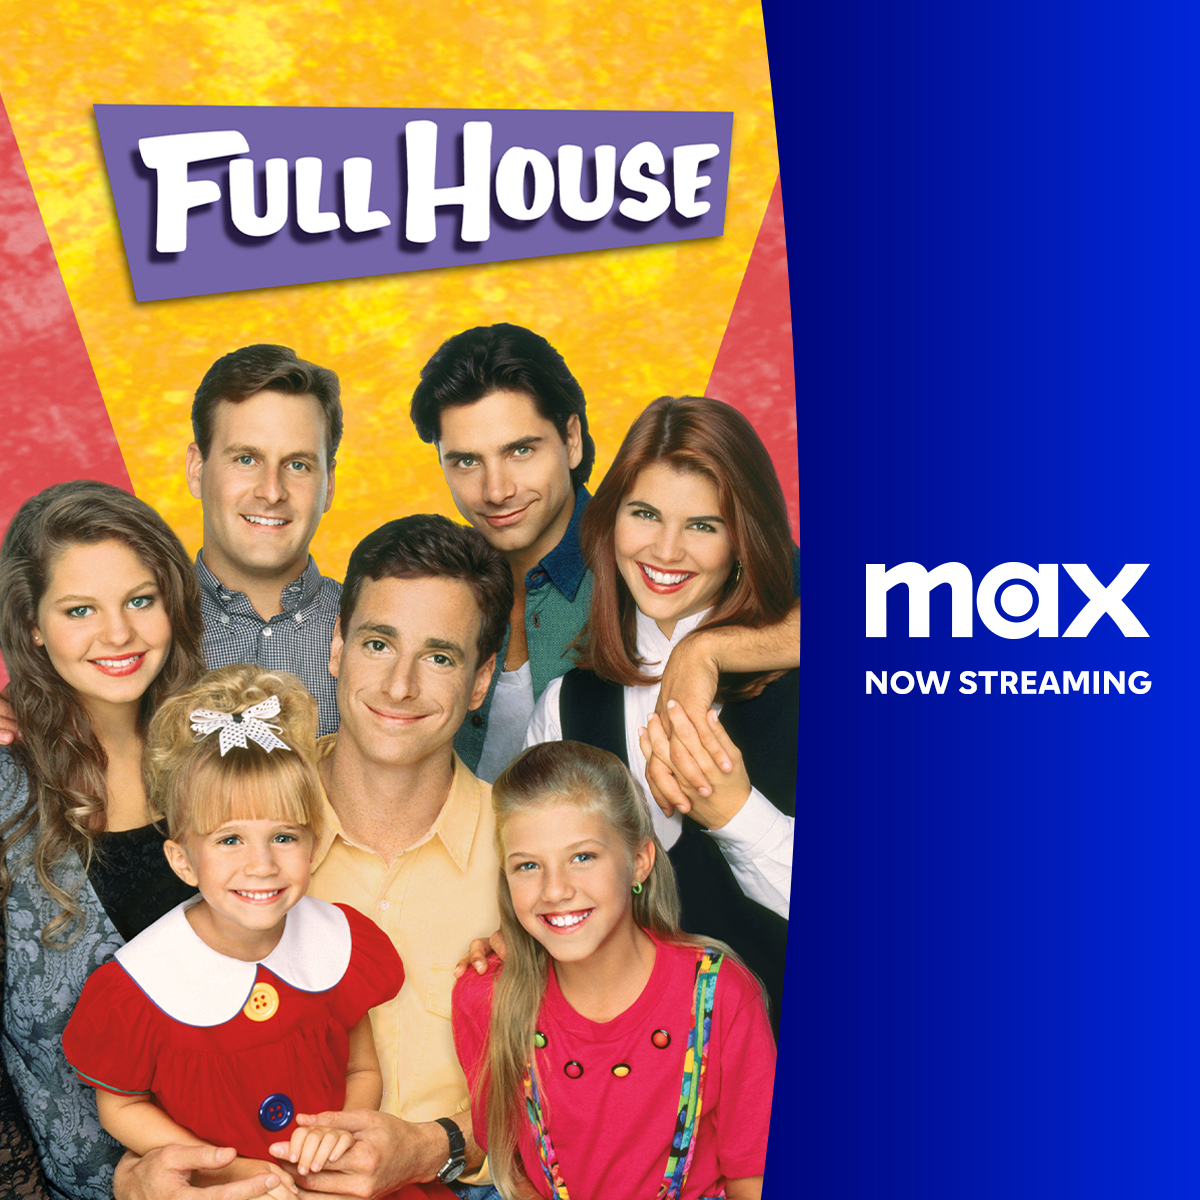 #FullHouse is now streaming on Max. #TheOneToWatch @StreamOnMax